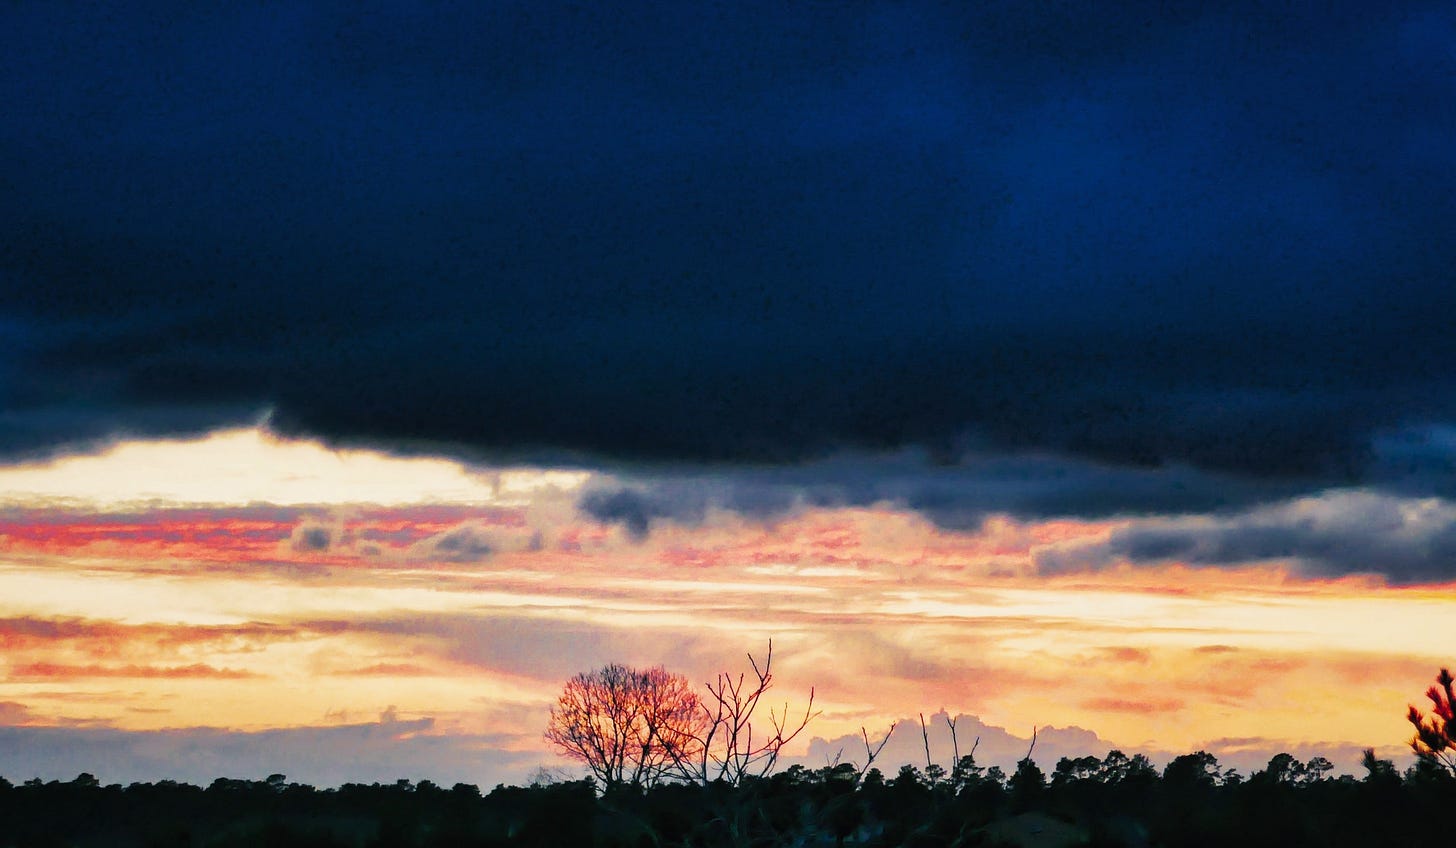 Dark clouds hover over the horizon with sun-streaked clouds below and a single tree in the middle reflecting the range of the setting sun